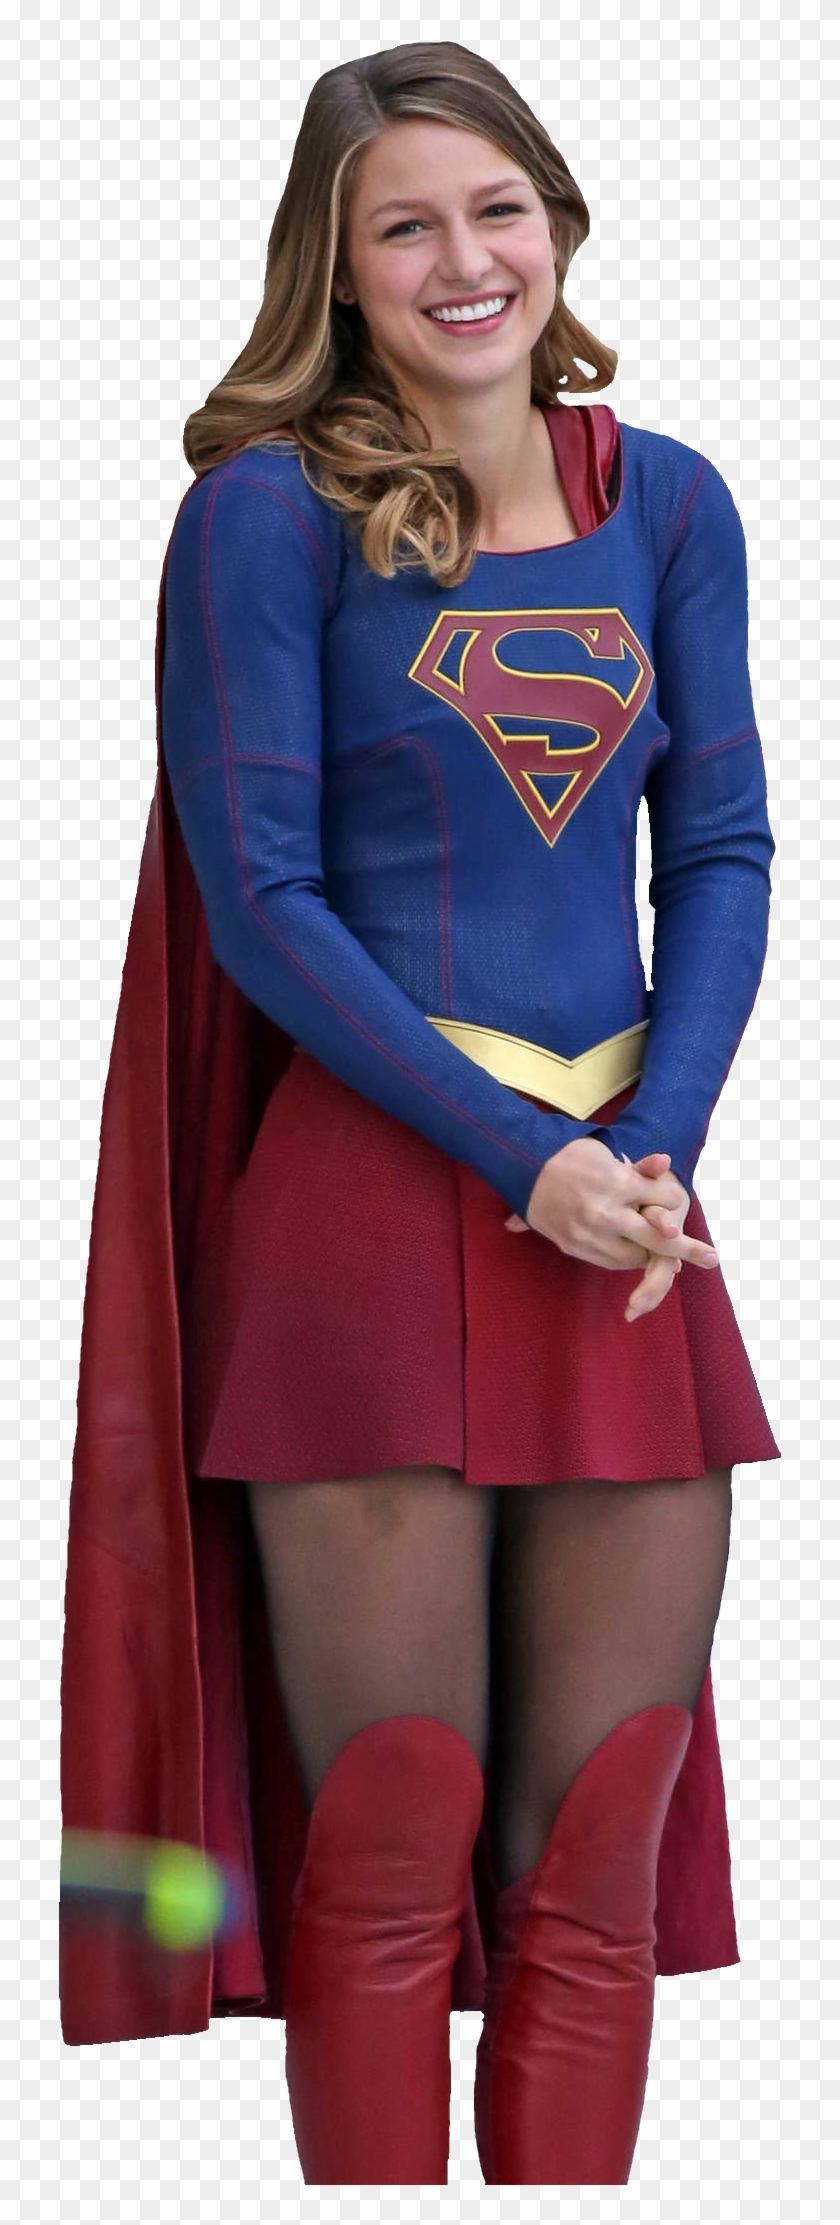 Supergirl Png High-quality Image - Lab Rats Chase Mission Suit Clipart #274443